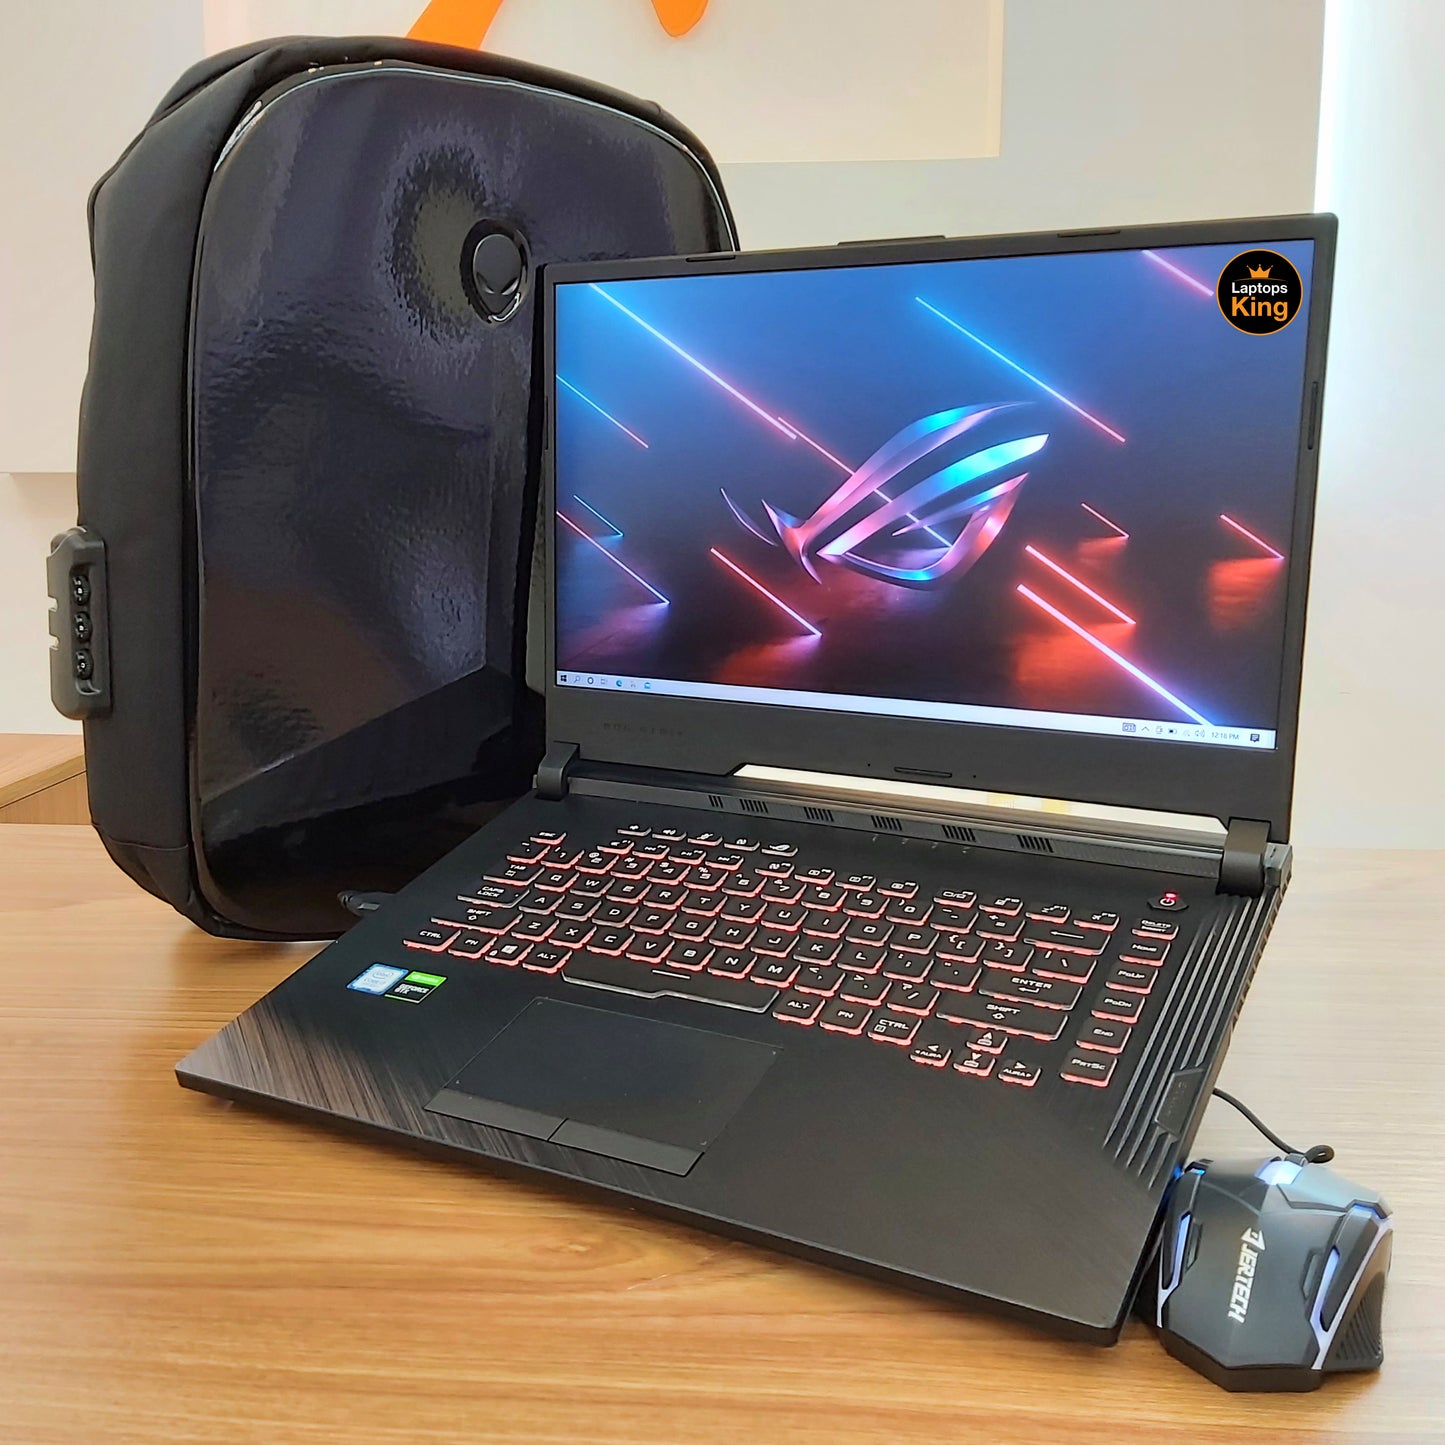 Asus Rog Strix G531GT i7-9750H GTX 1650 Gaming Laptop (Used Just Like New with Box)